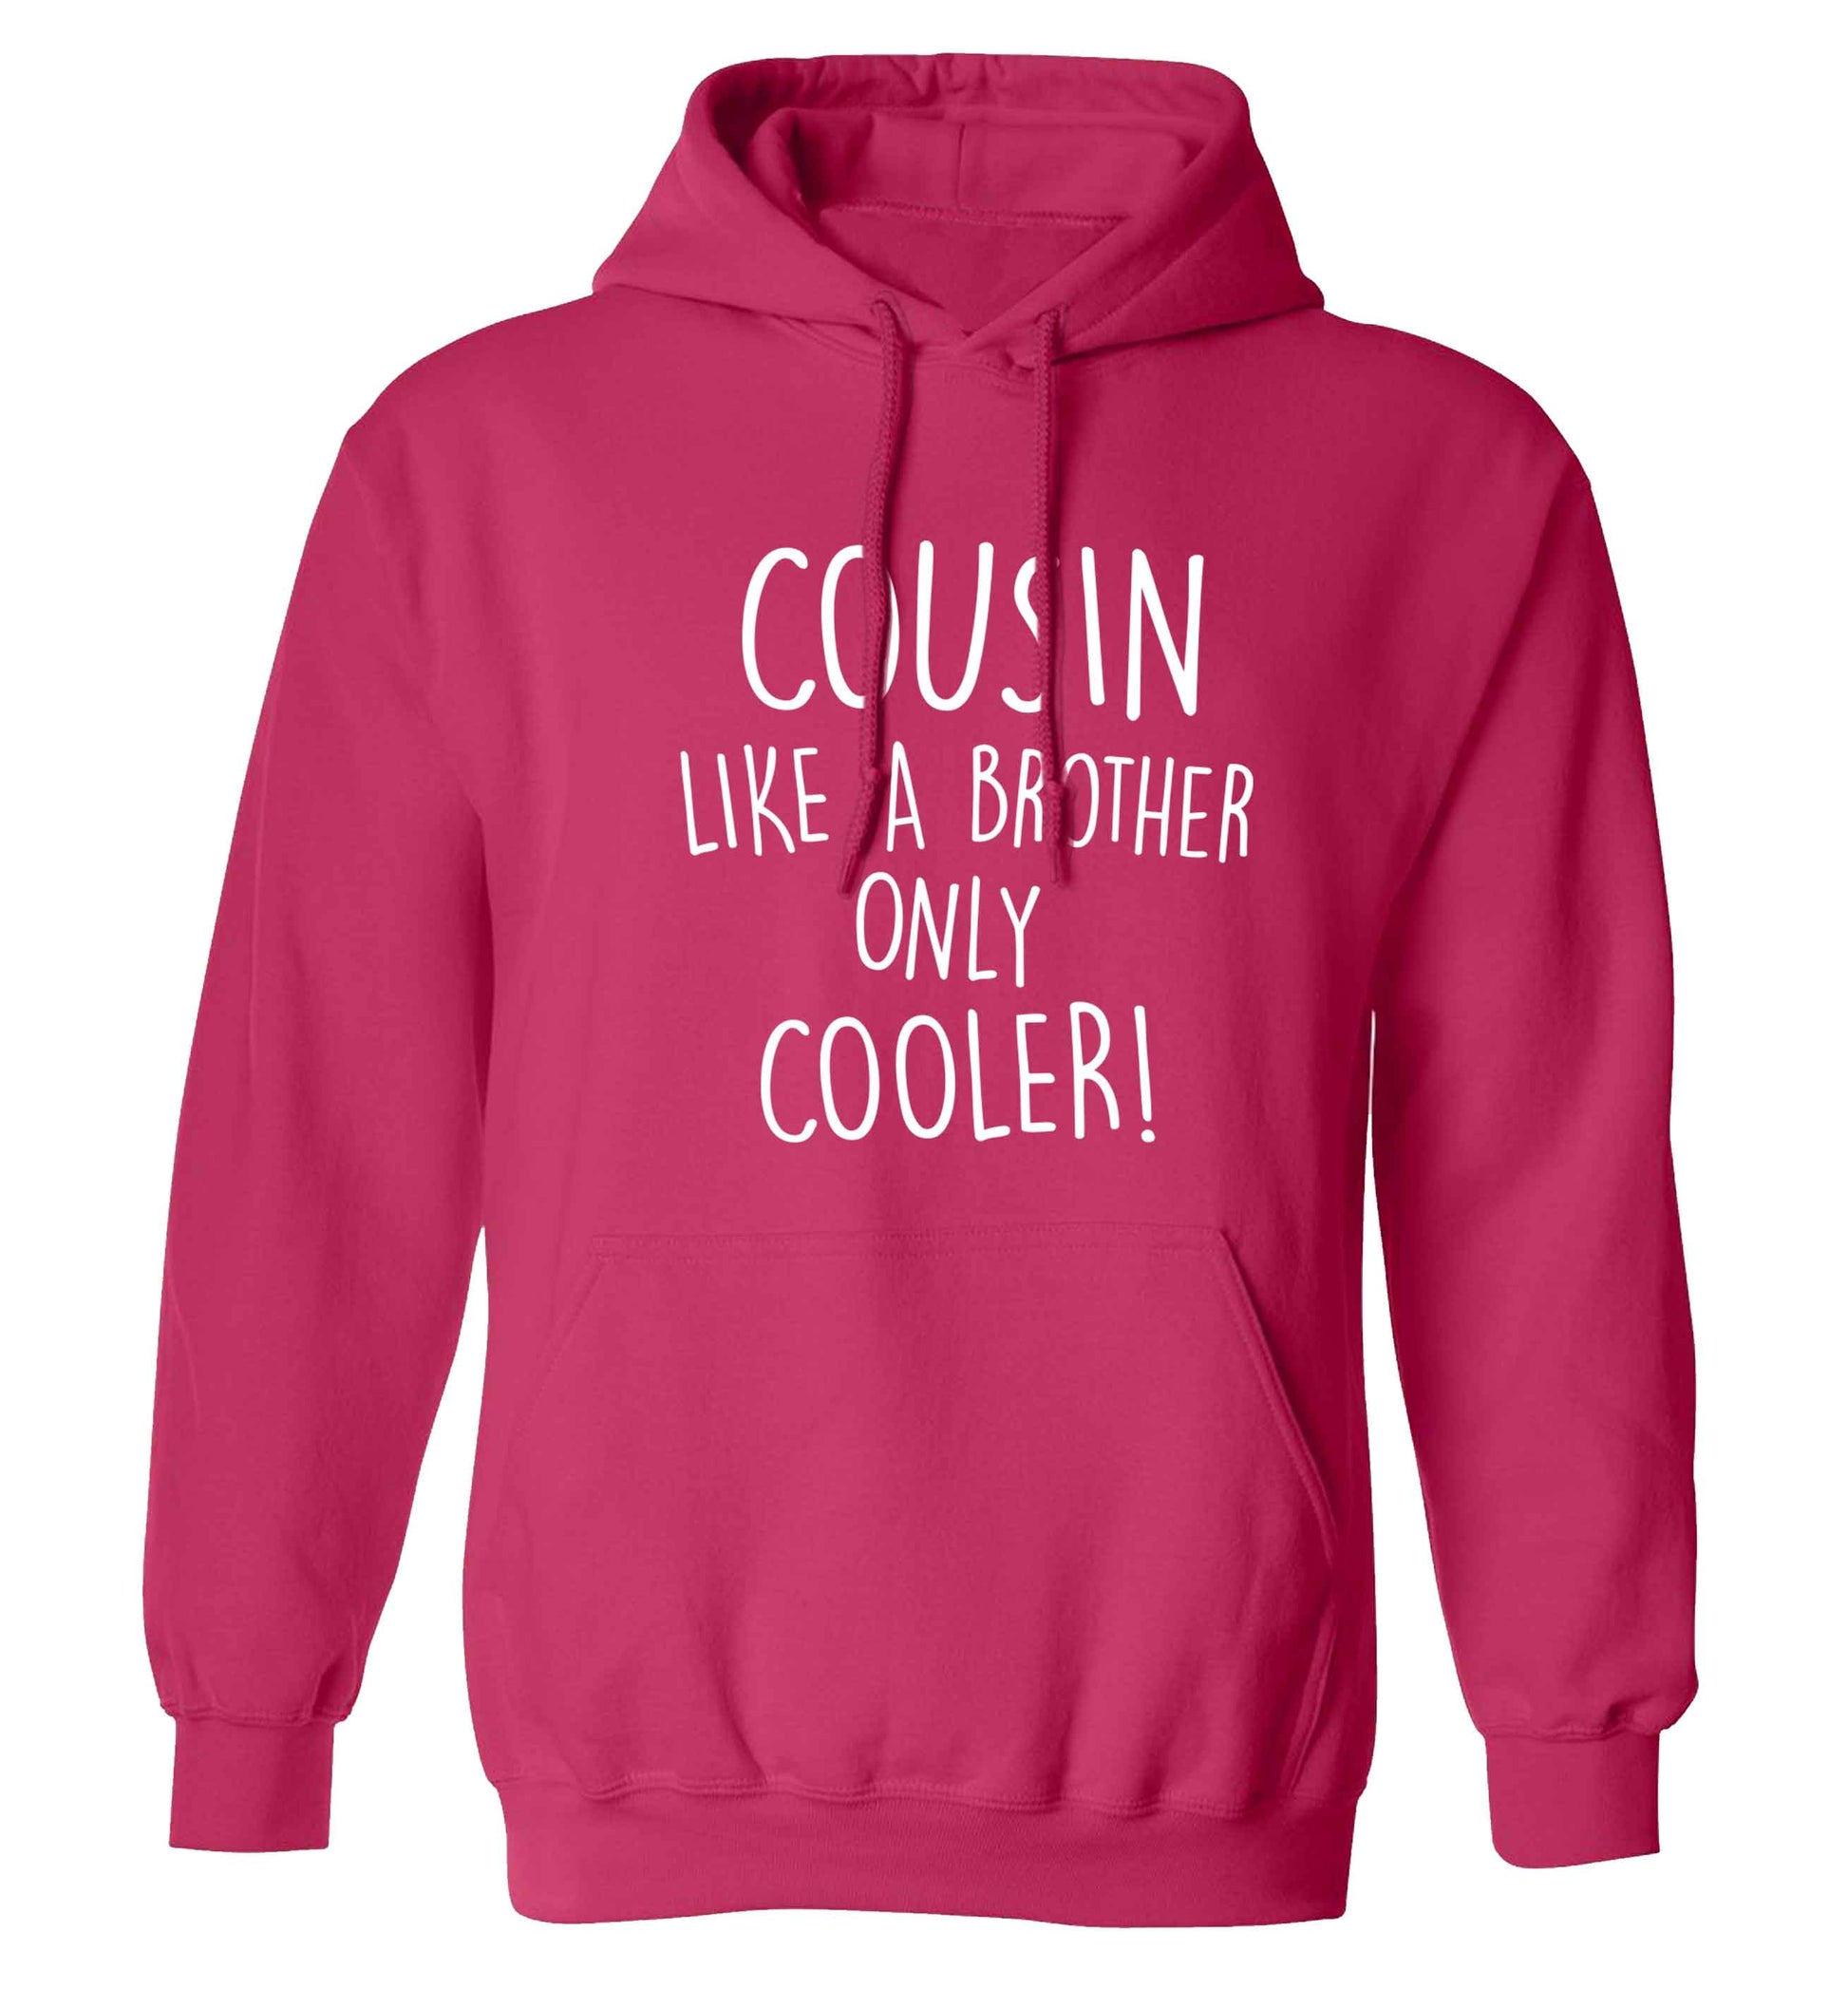 Cousin like a brother only cooler adults unisex pink hoodie 2XL